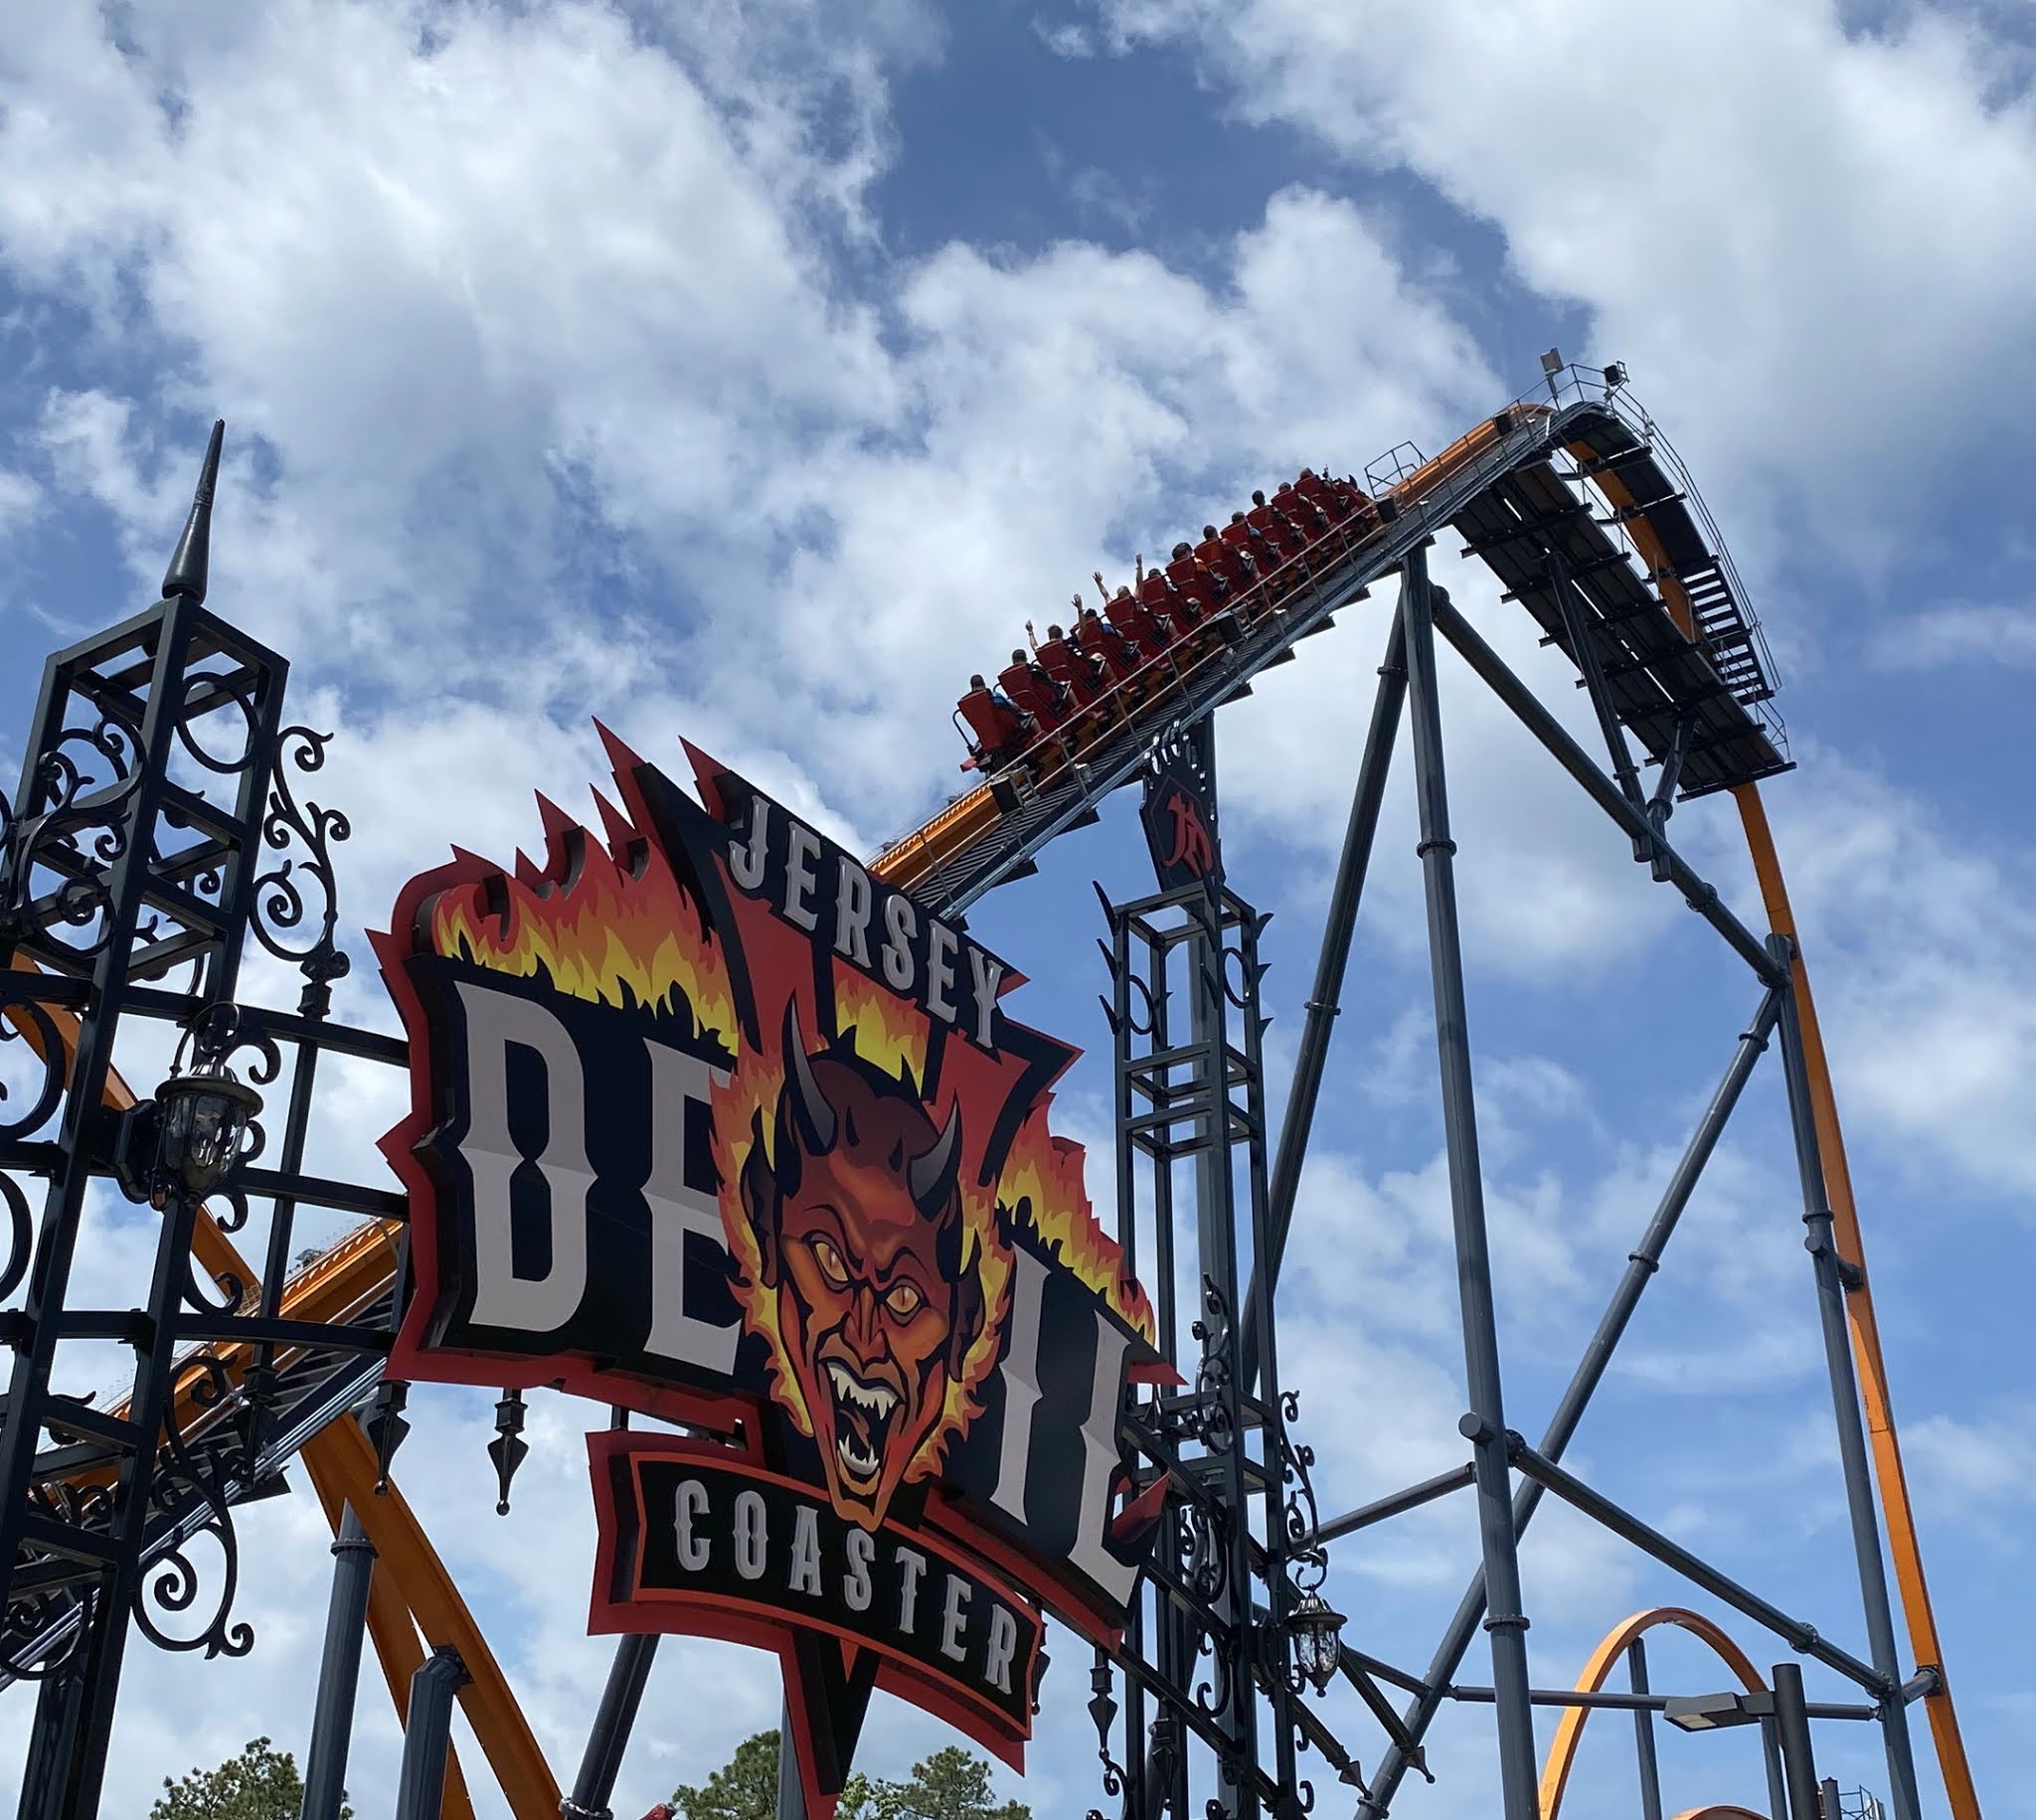 Wild 'Jersey Devil' Roller Coaster At Six Flags Opens Sunday